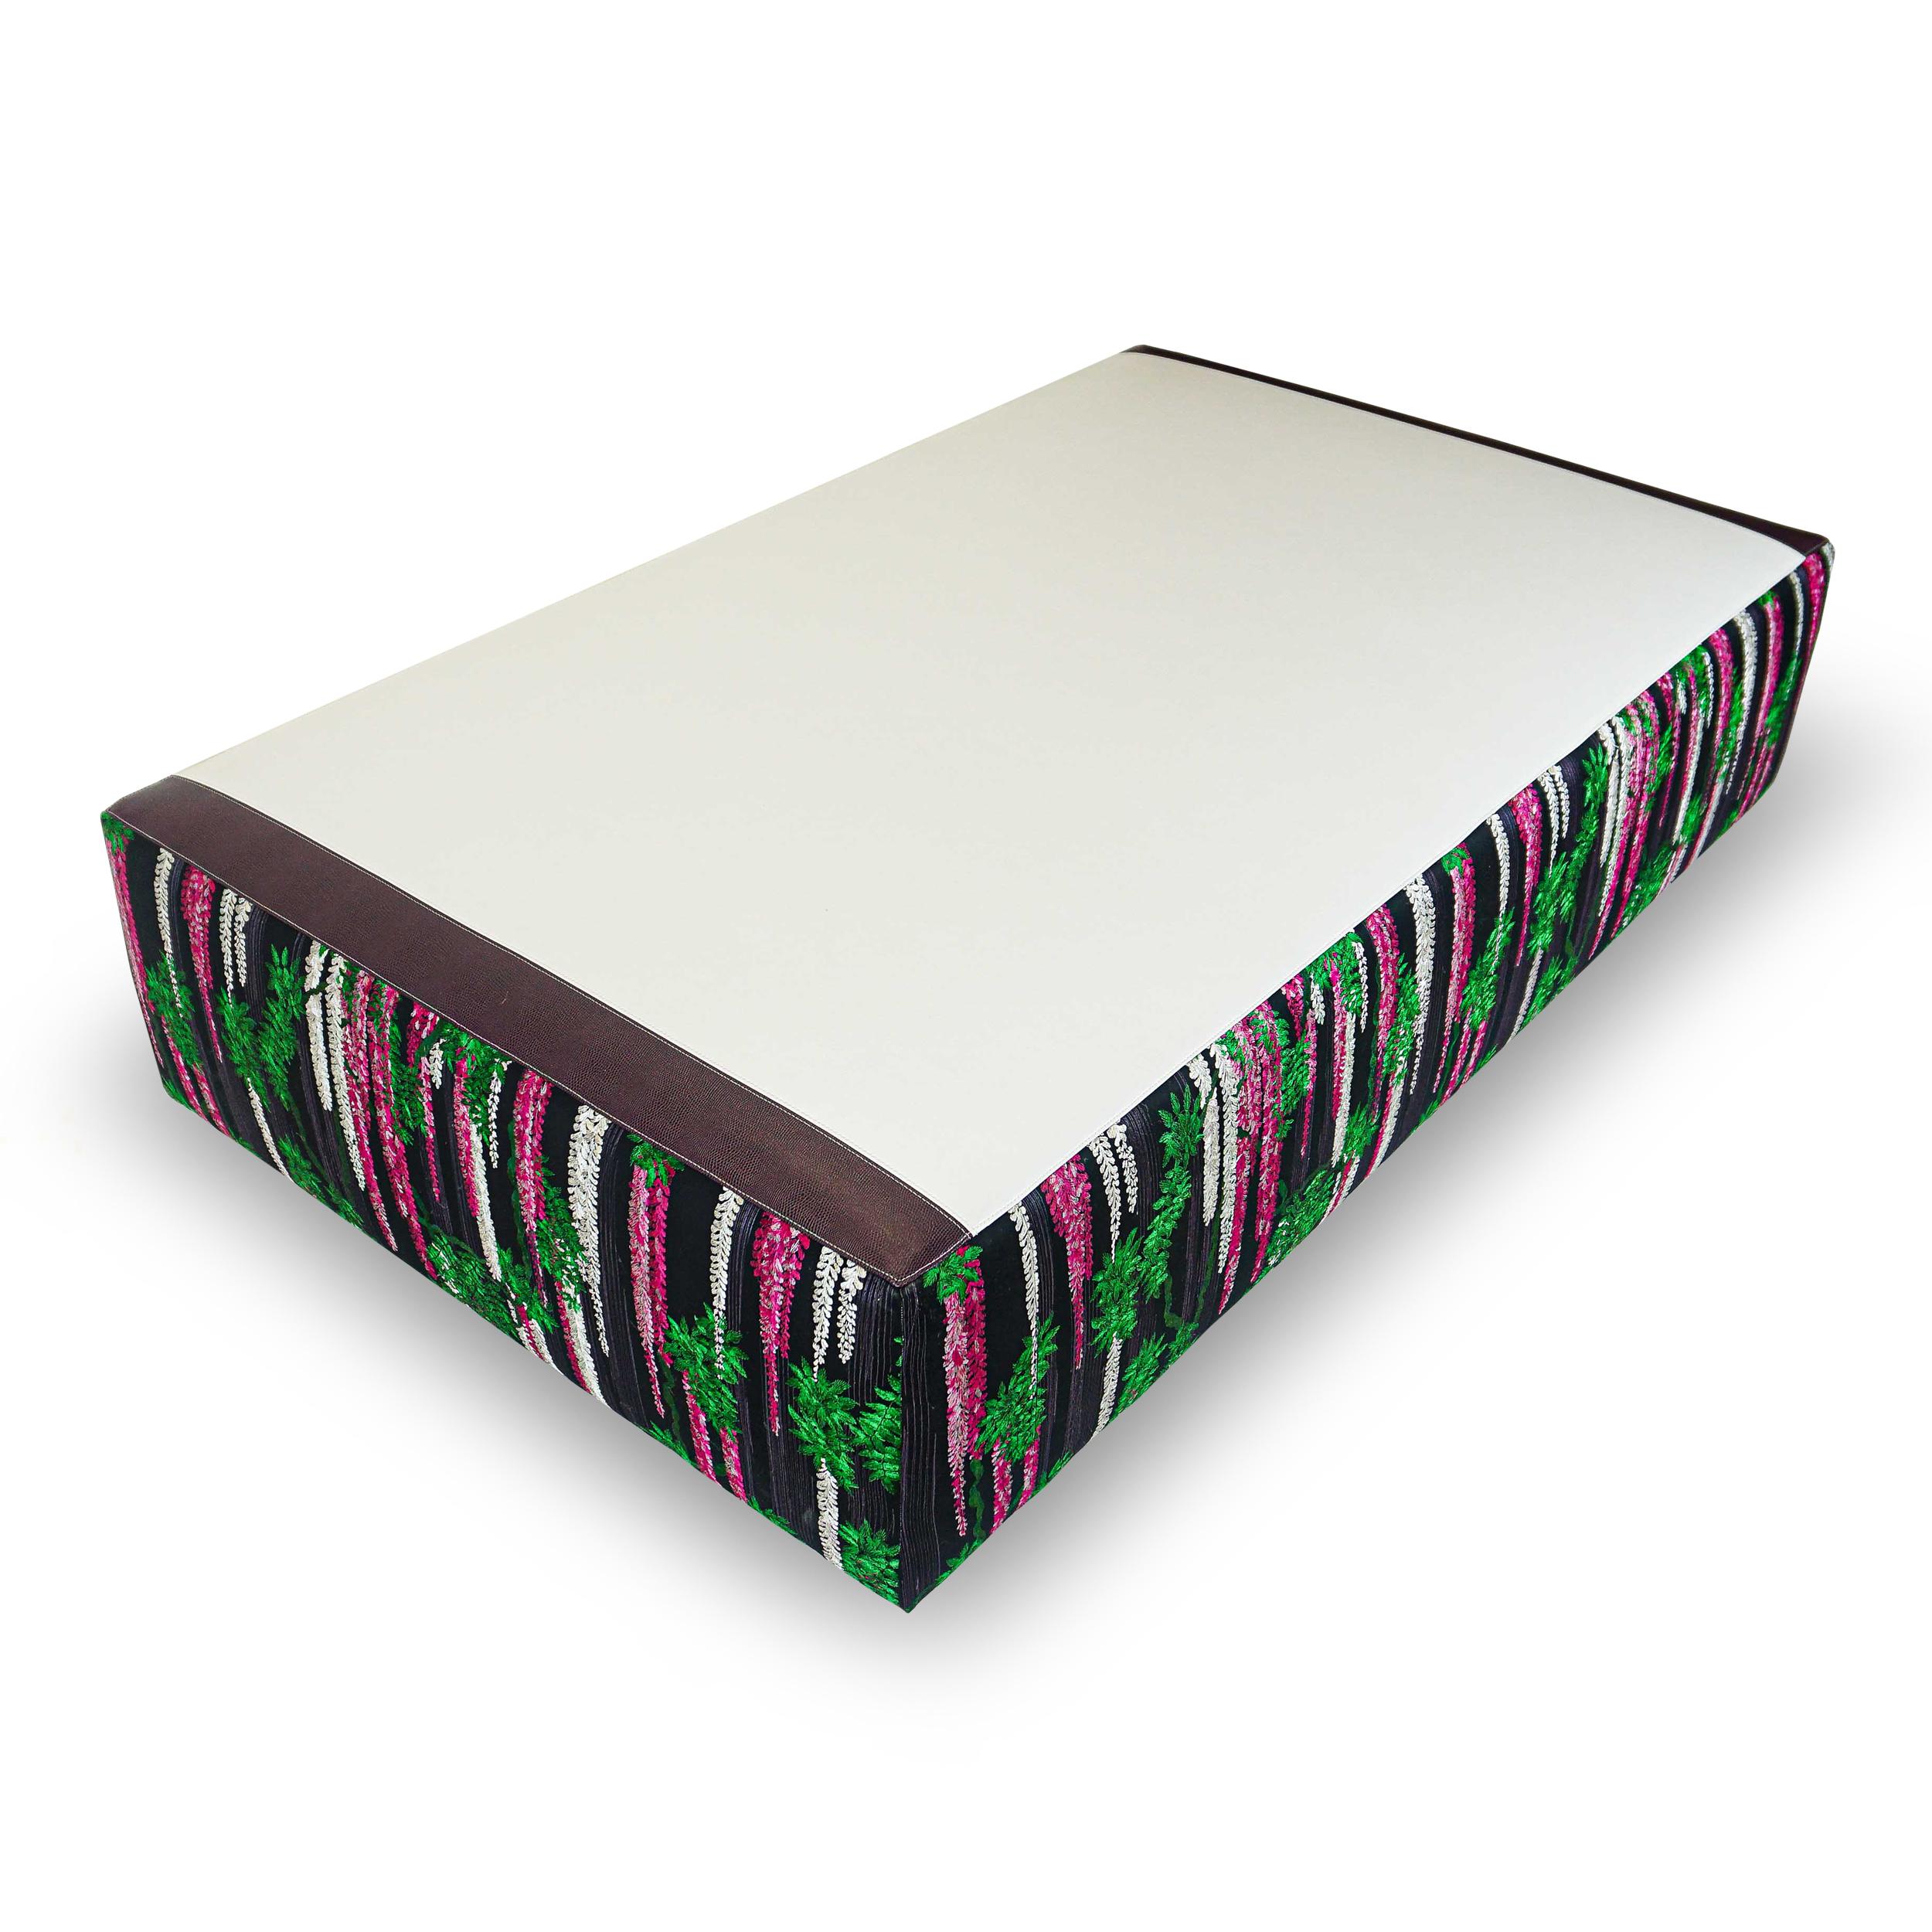 This oversize ottoman is upholstered in a faux white leather top with a rich plum accent strip at two ends. A glorious Christian Lacroix embroidery of richly shaded trailing wisteria juxtaposed against a striking graphite hued, pure cotton ground